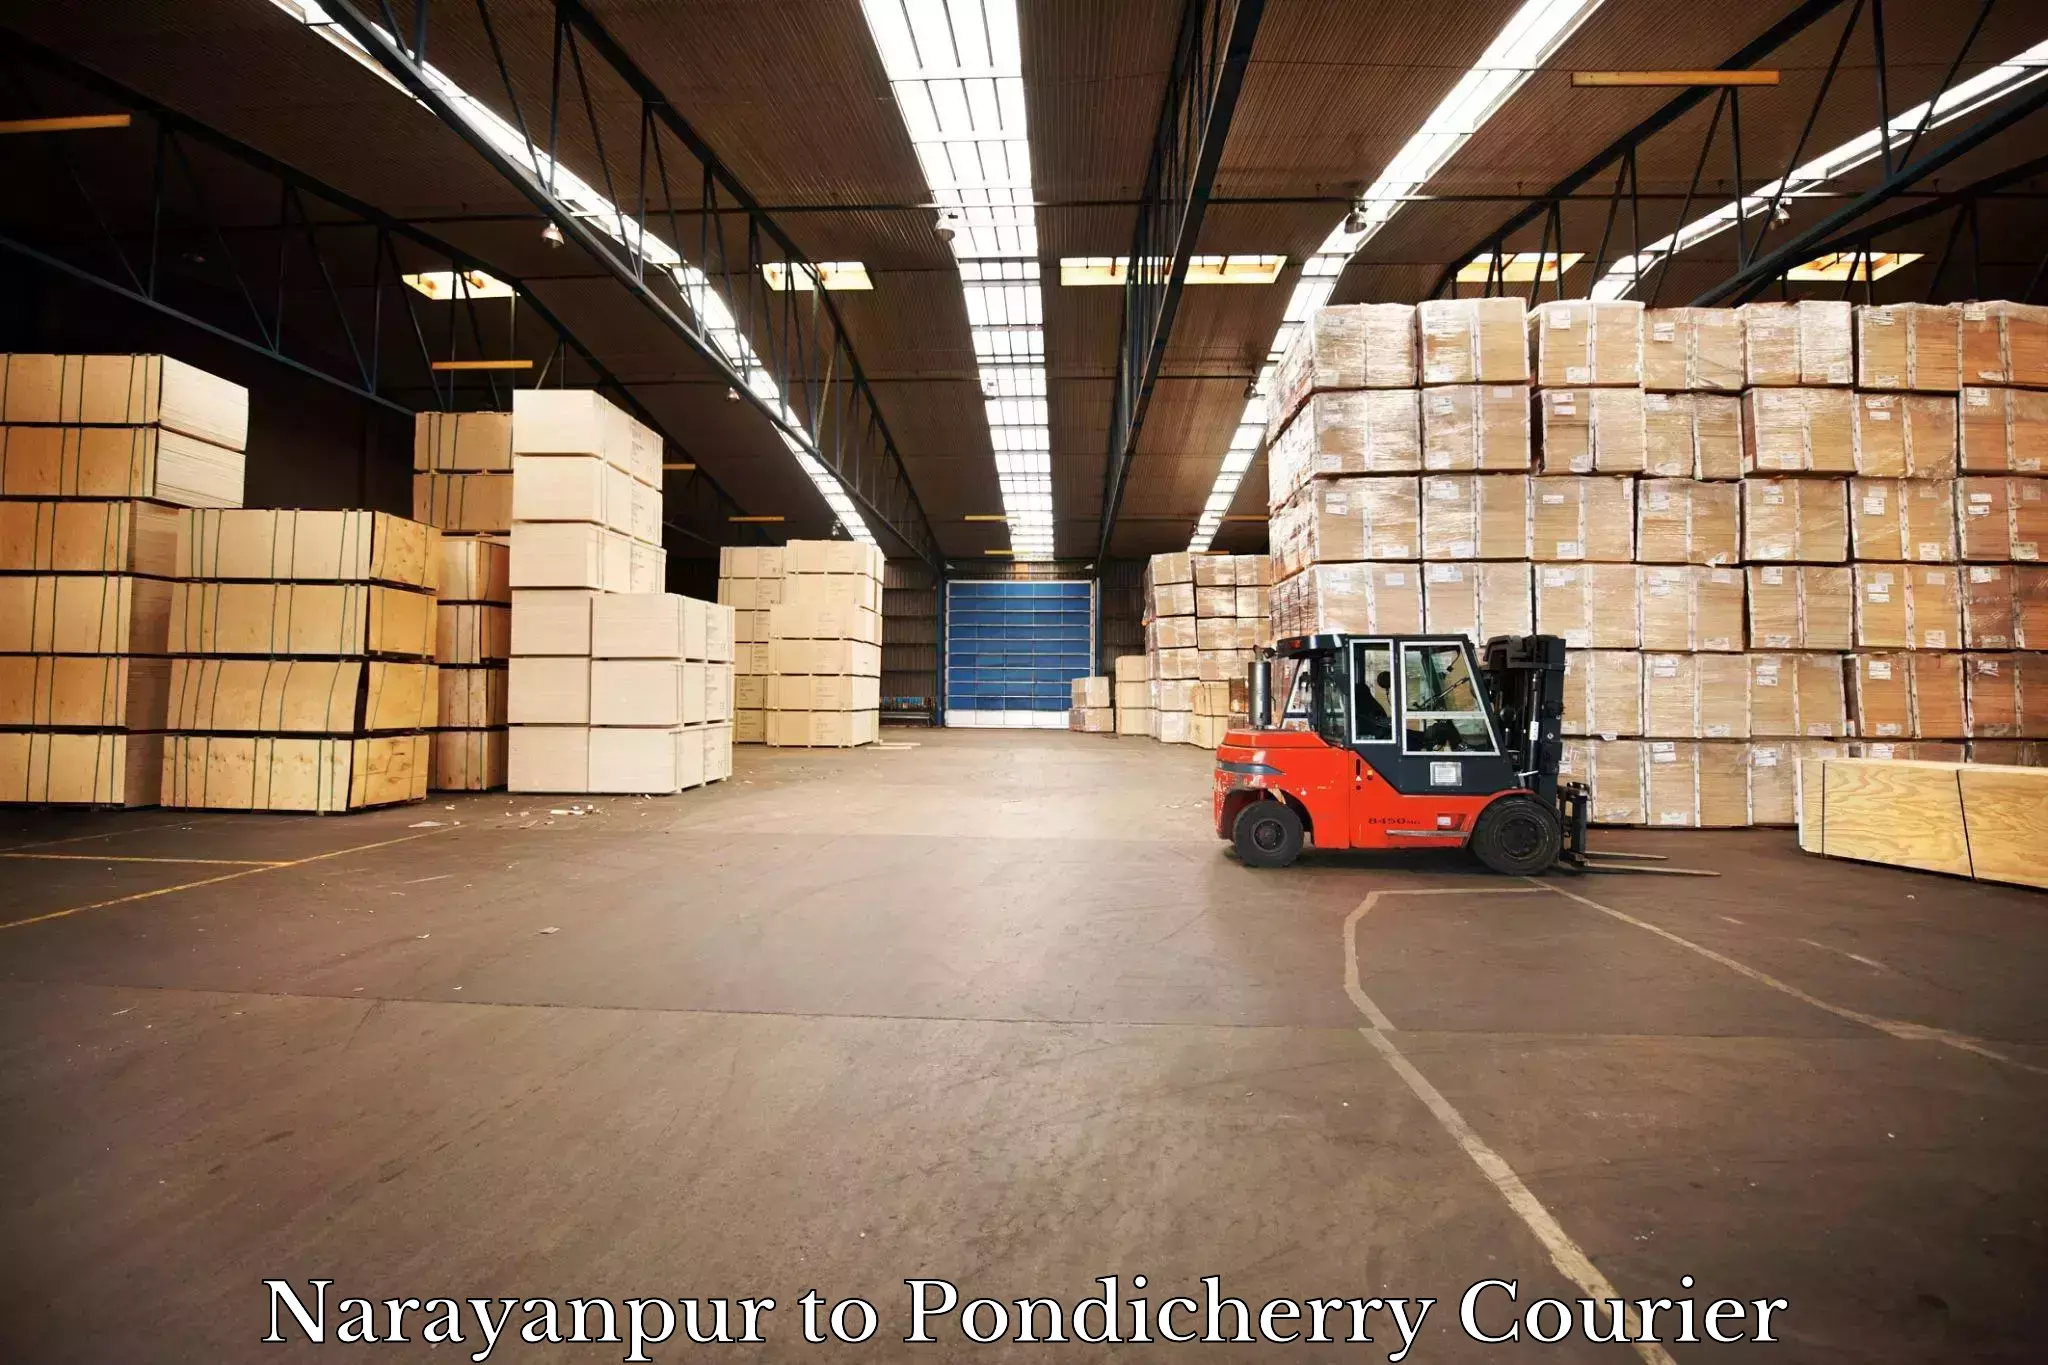 Package delivery network Narayanpur to Pondicherry University